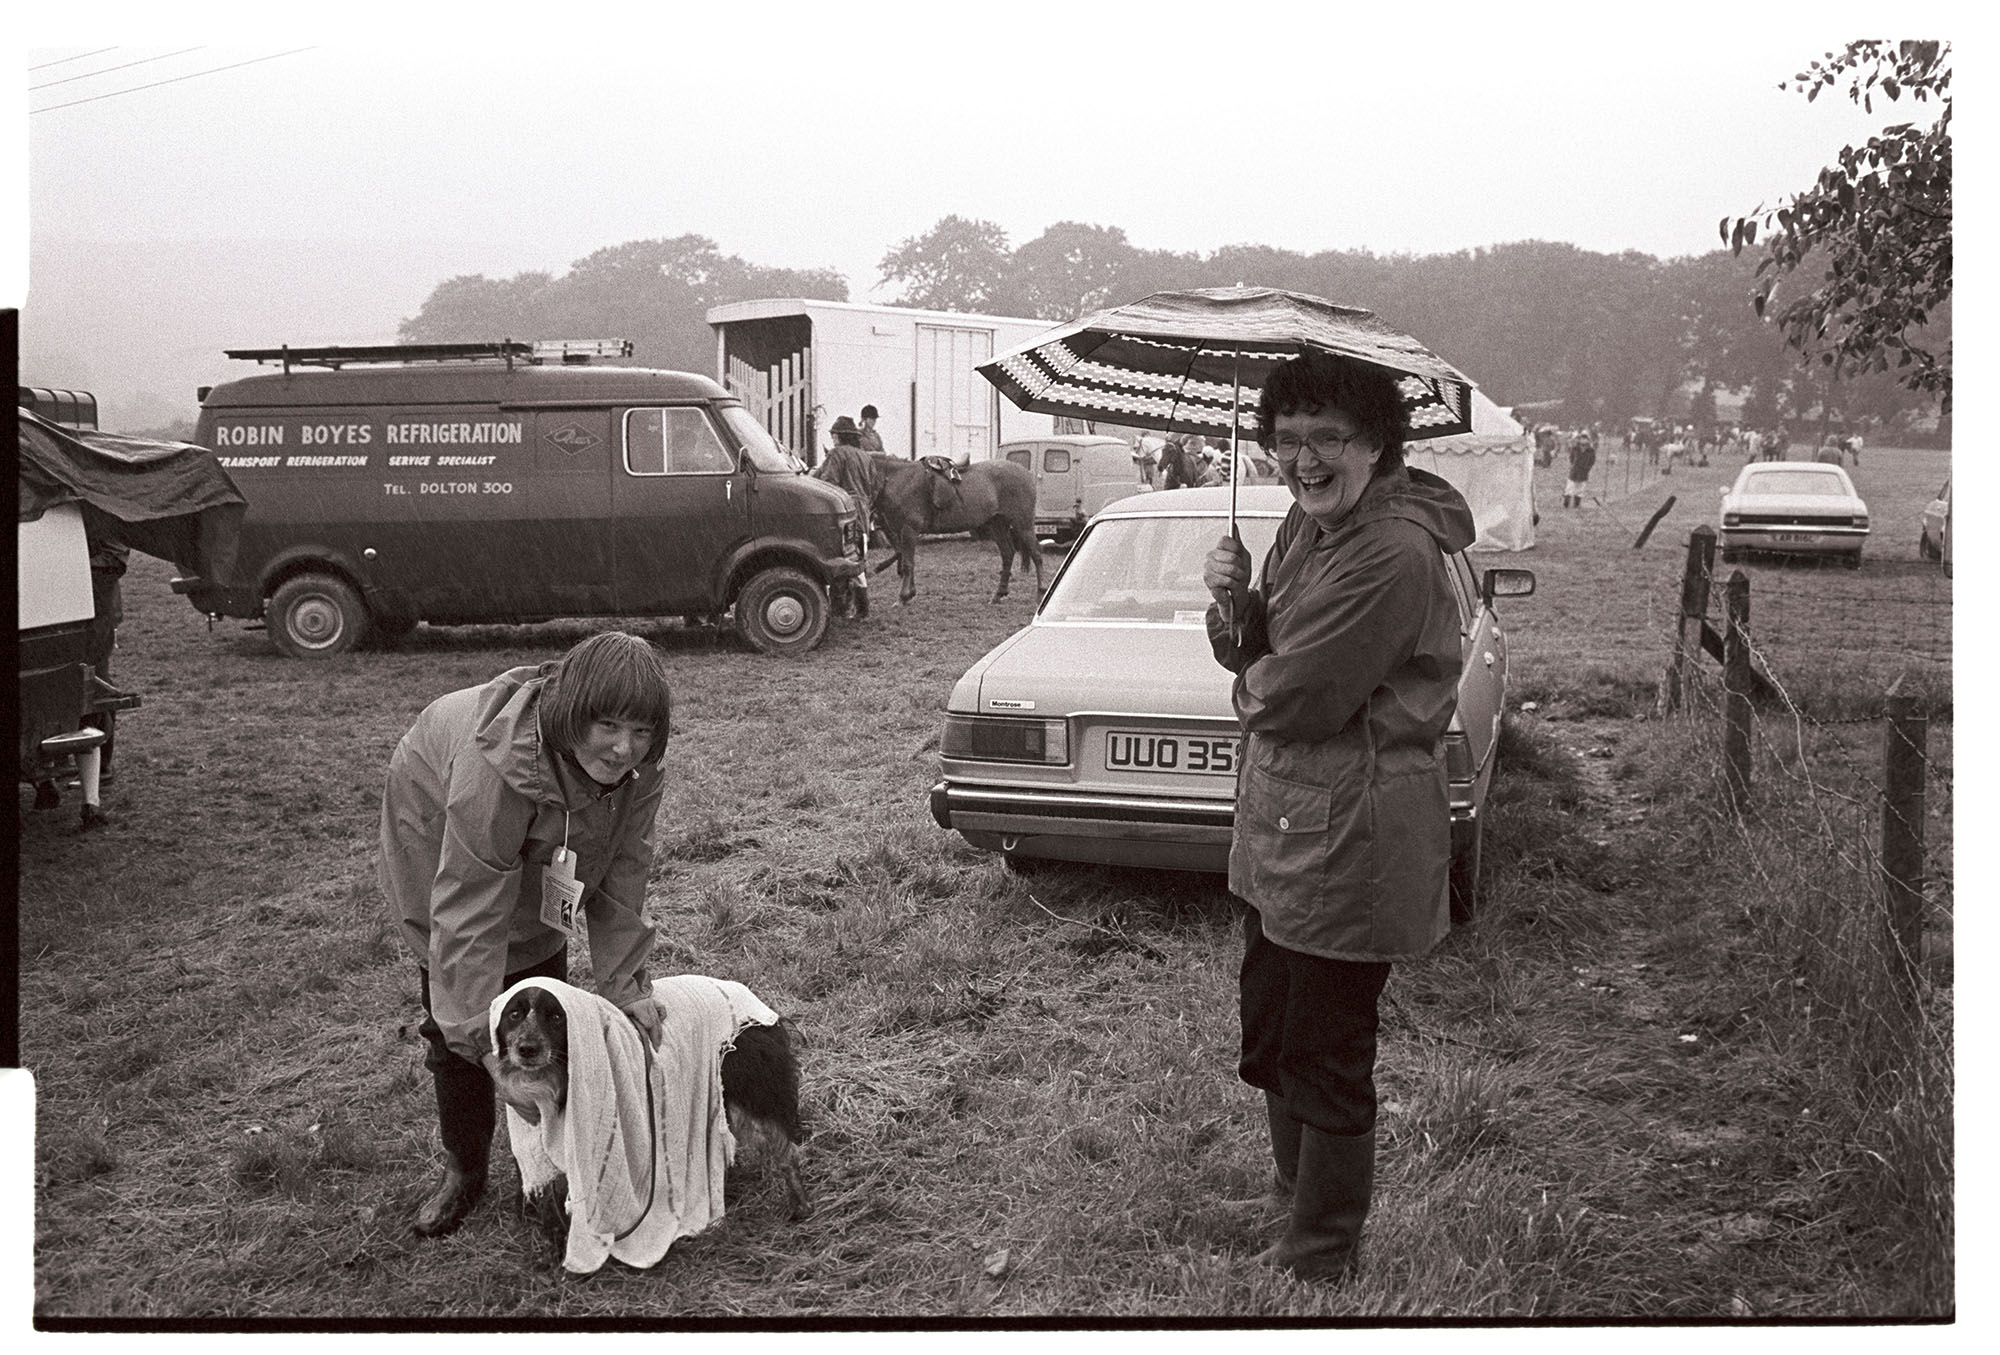 Gymkhana, dog show, trying to dry out dog in pouring rain! Humorous. <br /> [Two women at Beaford Gymkhana. One woman is drying off a dog with a towel and the other is standing watching under an umbrella. In the background parked cars, horse boxes, horses and riders can be seen.]